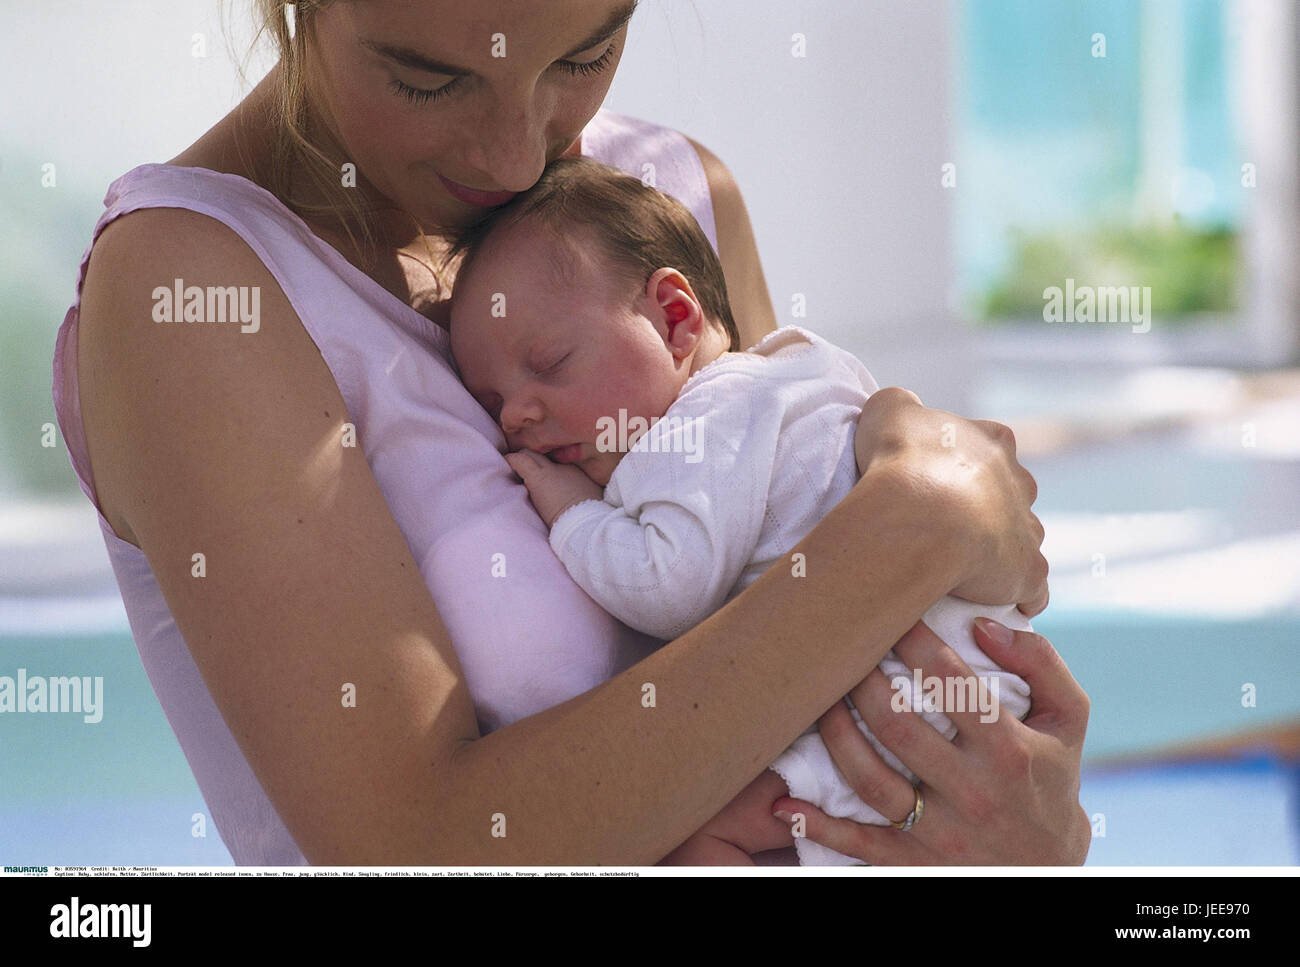 Baby, sleep, mother, tenderness, portrait inside, at home, woman, young, happily, child, infant, peacefully, small, softly, delicacy, protects, love, care, securely, Geborheit, protective-destitute Stock Photo